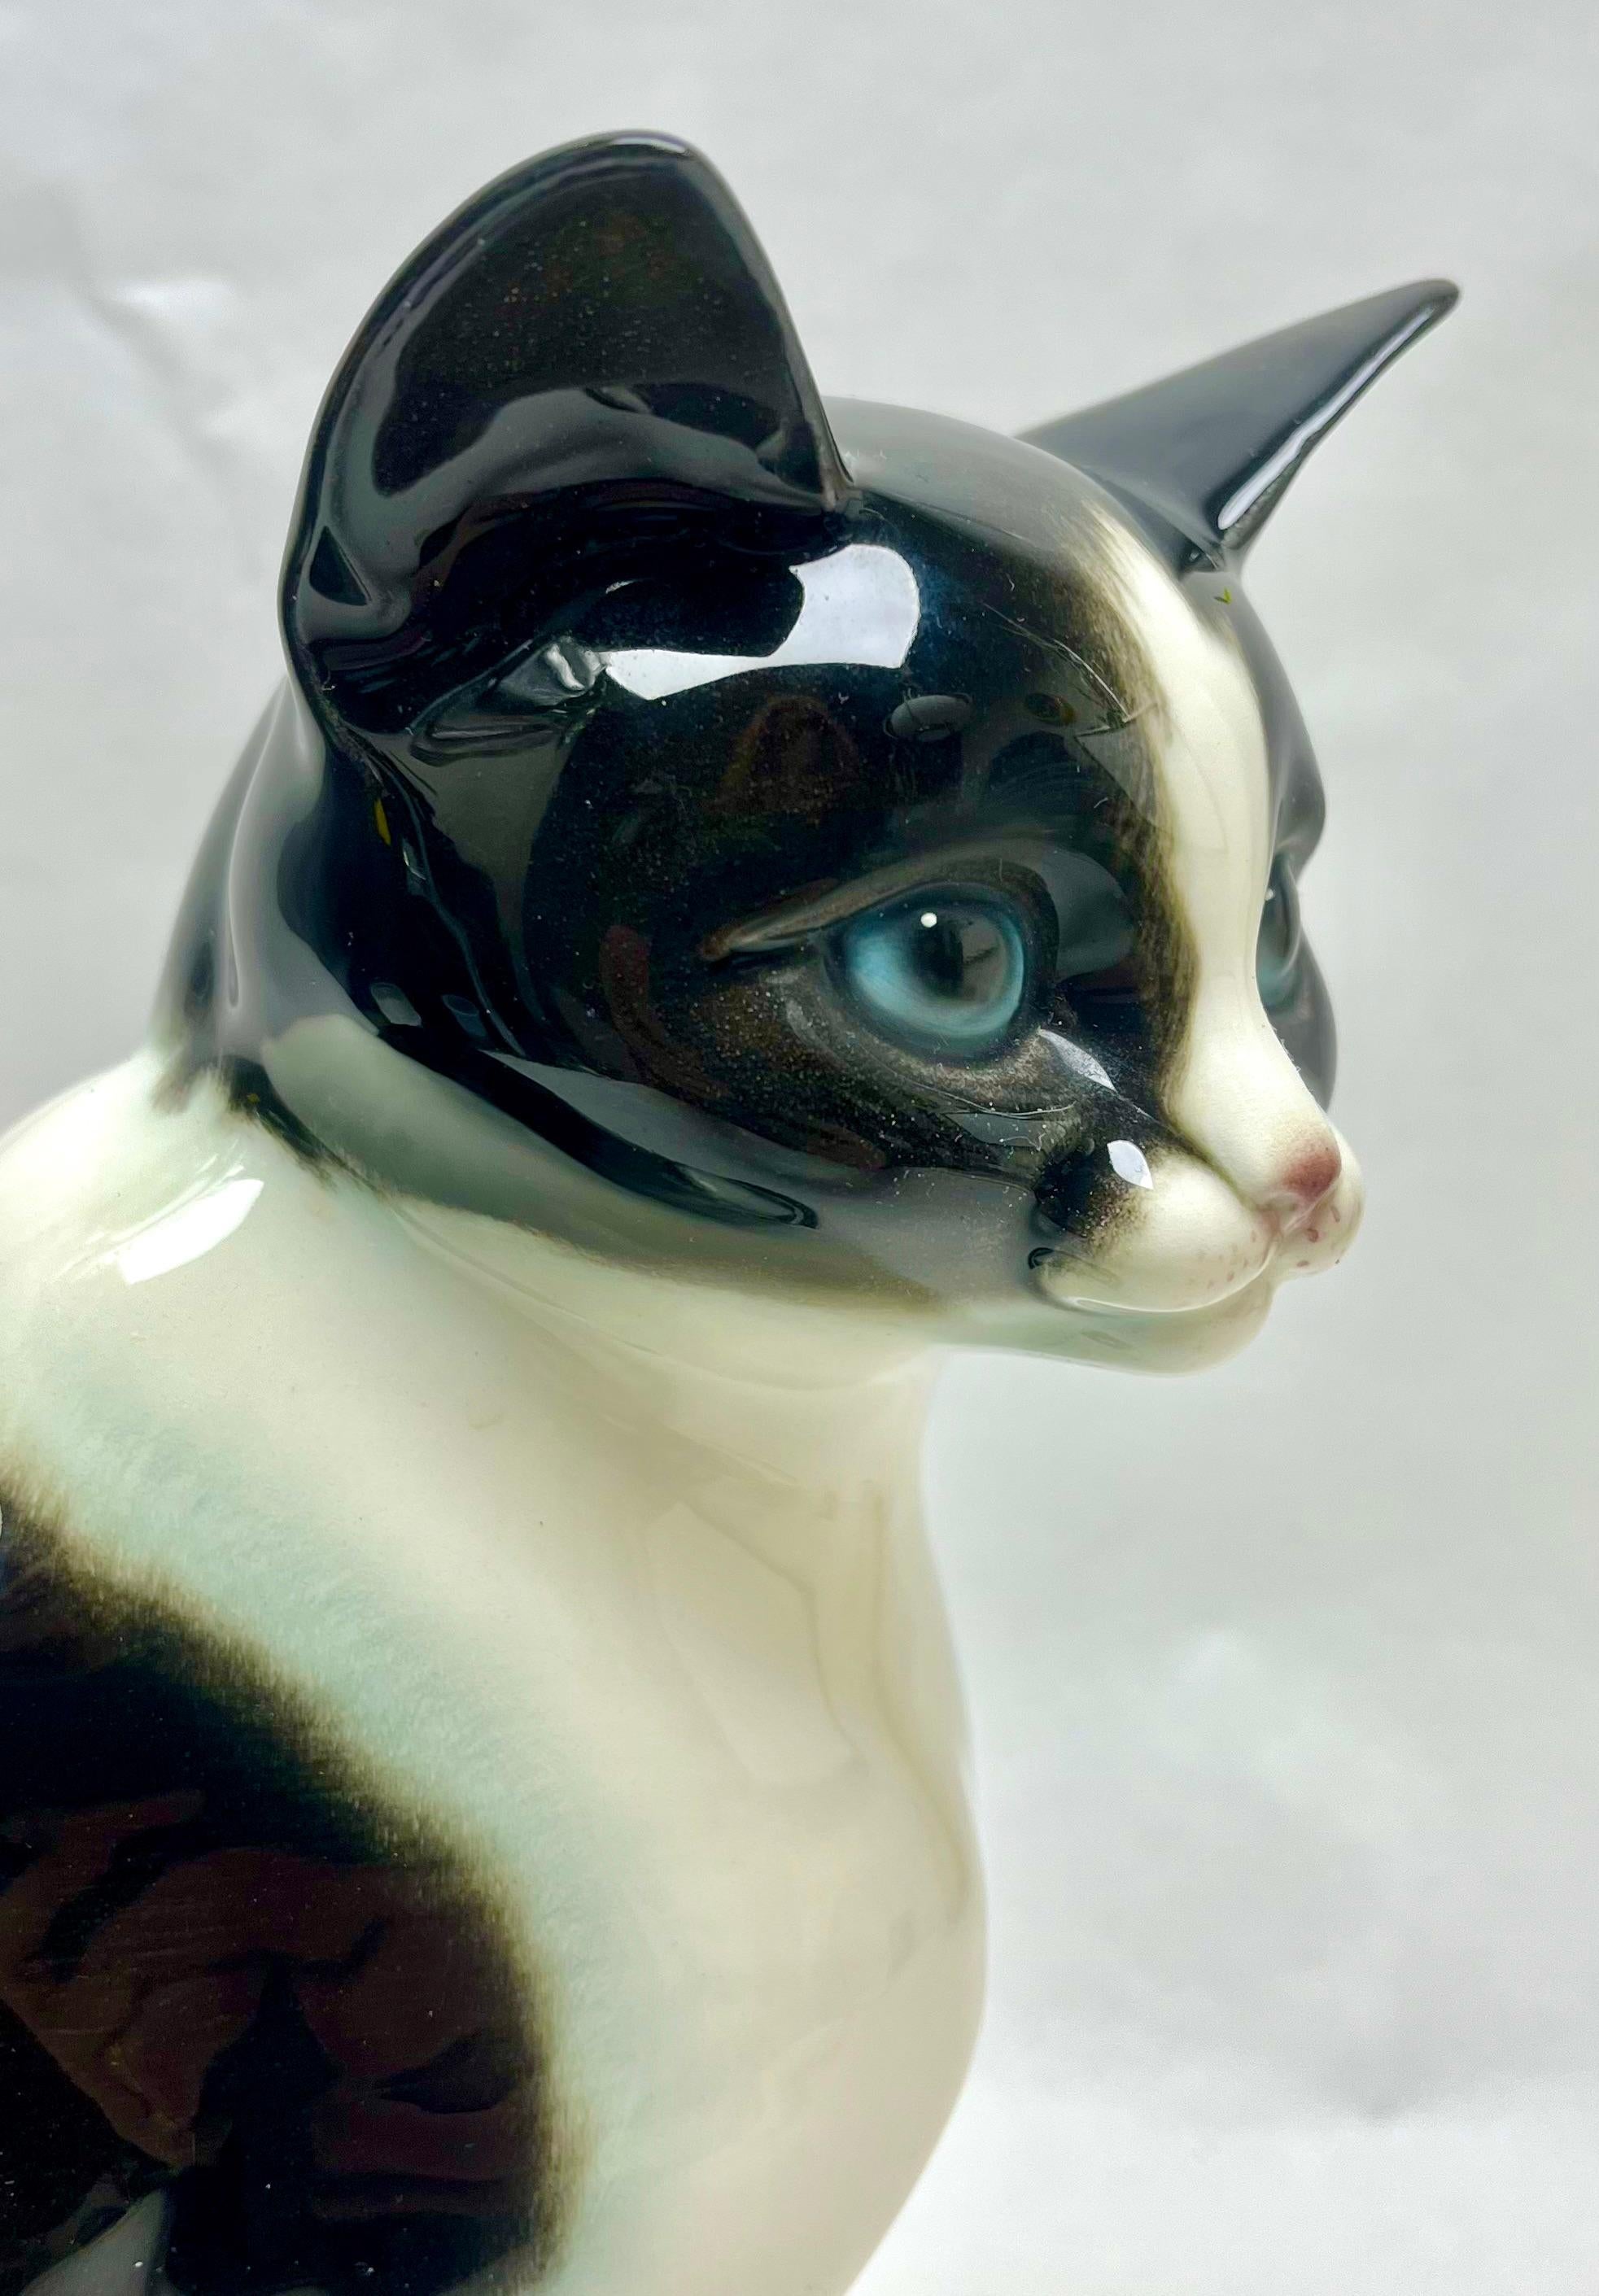 Goebel produced this dramatic porcelain figurine depicting a Cat, circa 1960.
The piece is in excellent condition and a real beauty.

Measures: height: 10.63 in (27 cm)?
diameter: 6.3 in (16 cm)










 